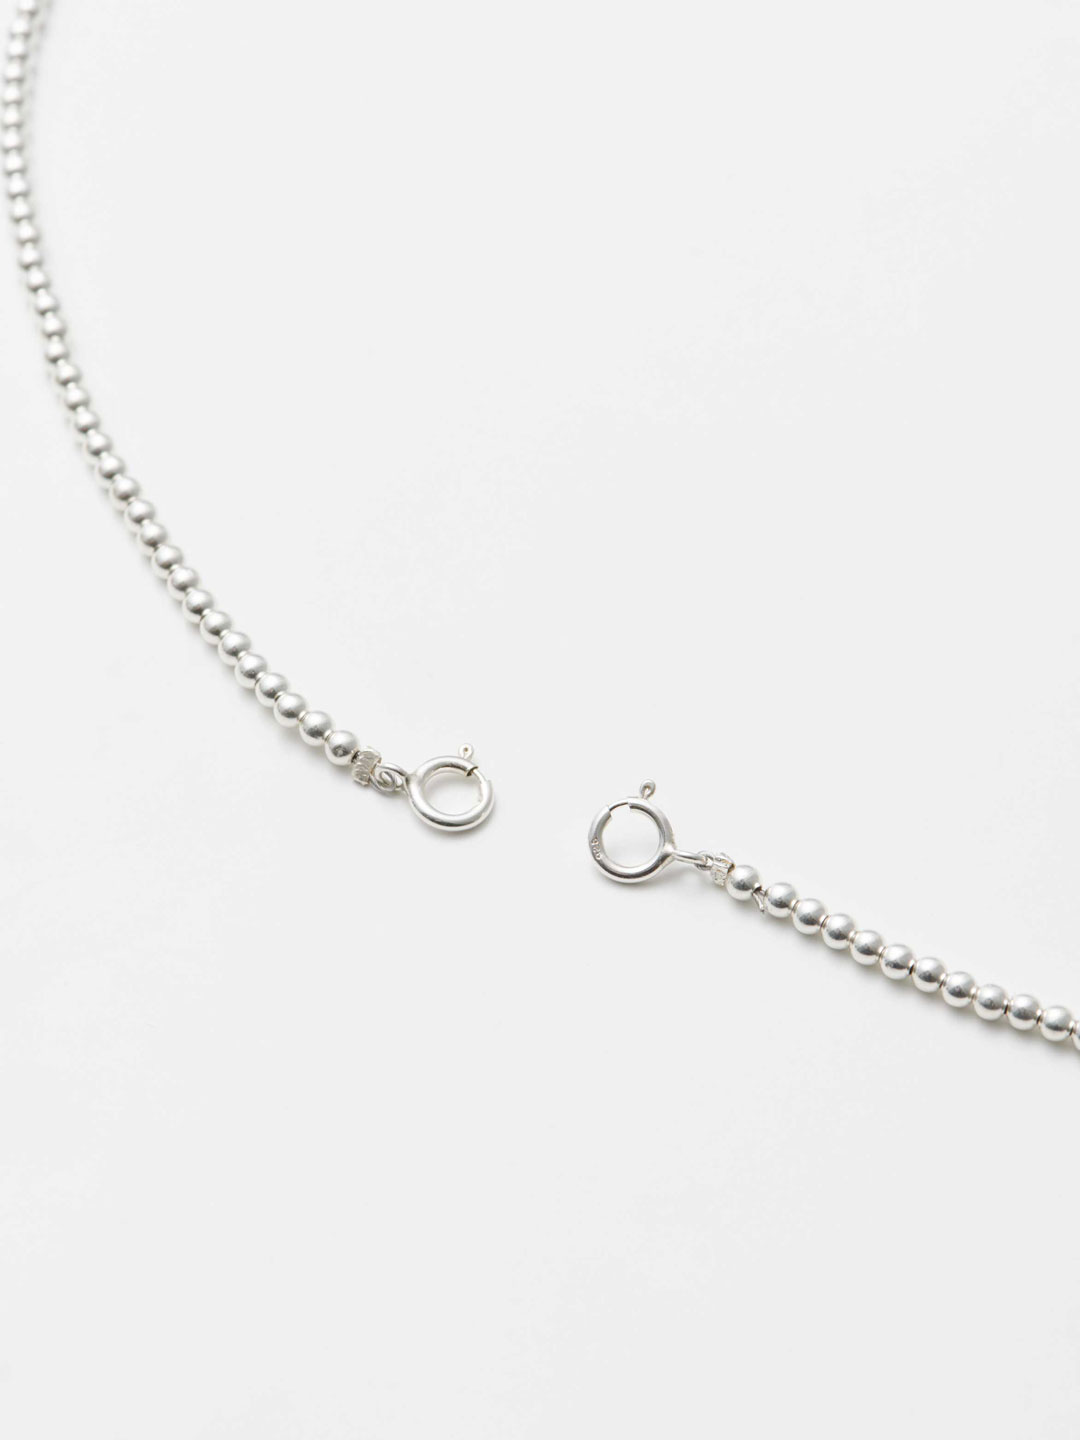 Mask Chain Necklace / 3mm Ball - Silver